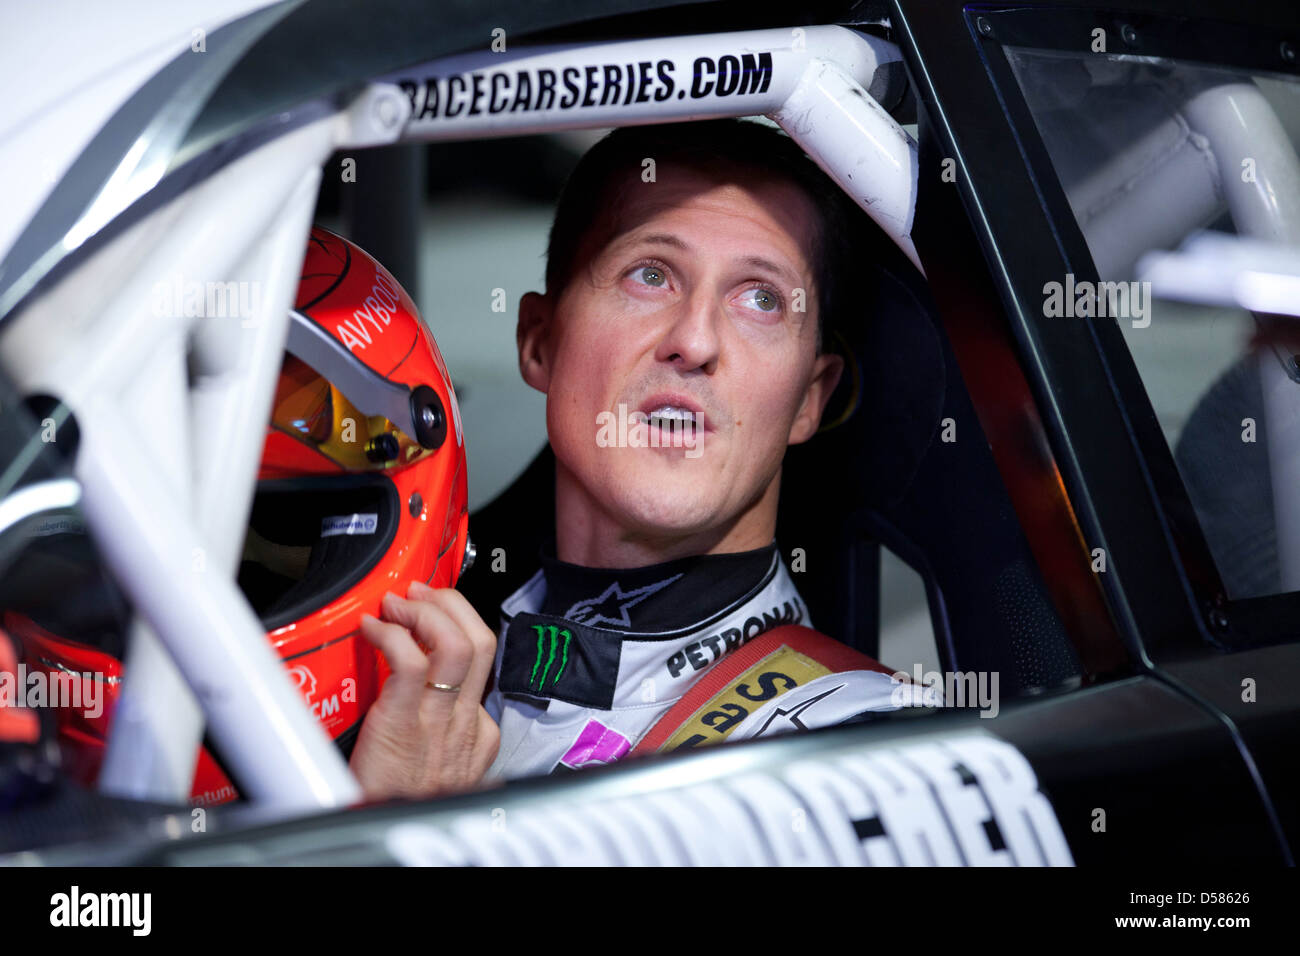 Masaccio missil katolsk Michael Schumacher at "Race Of Champions" at Esprit Arena. Duesseldorf,  Germany - 03.12.2011 Stock Photo - Alamy